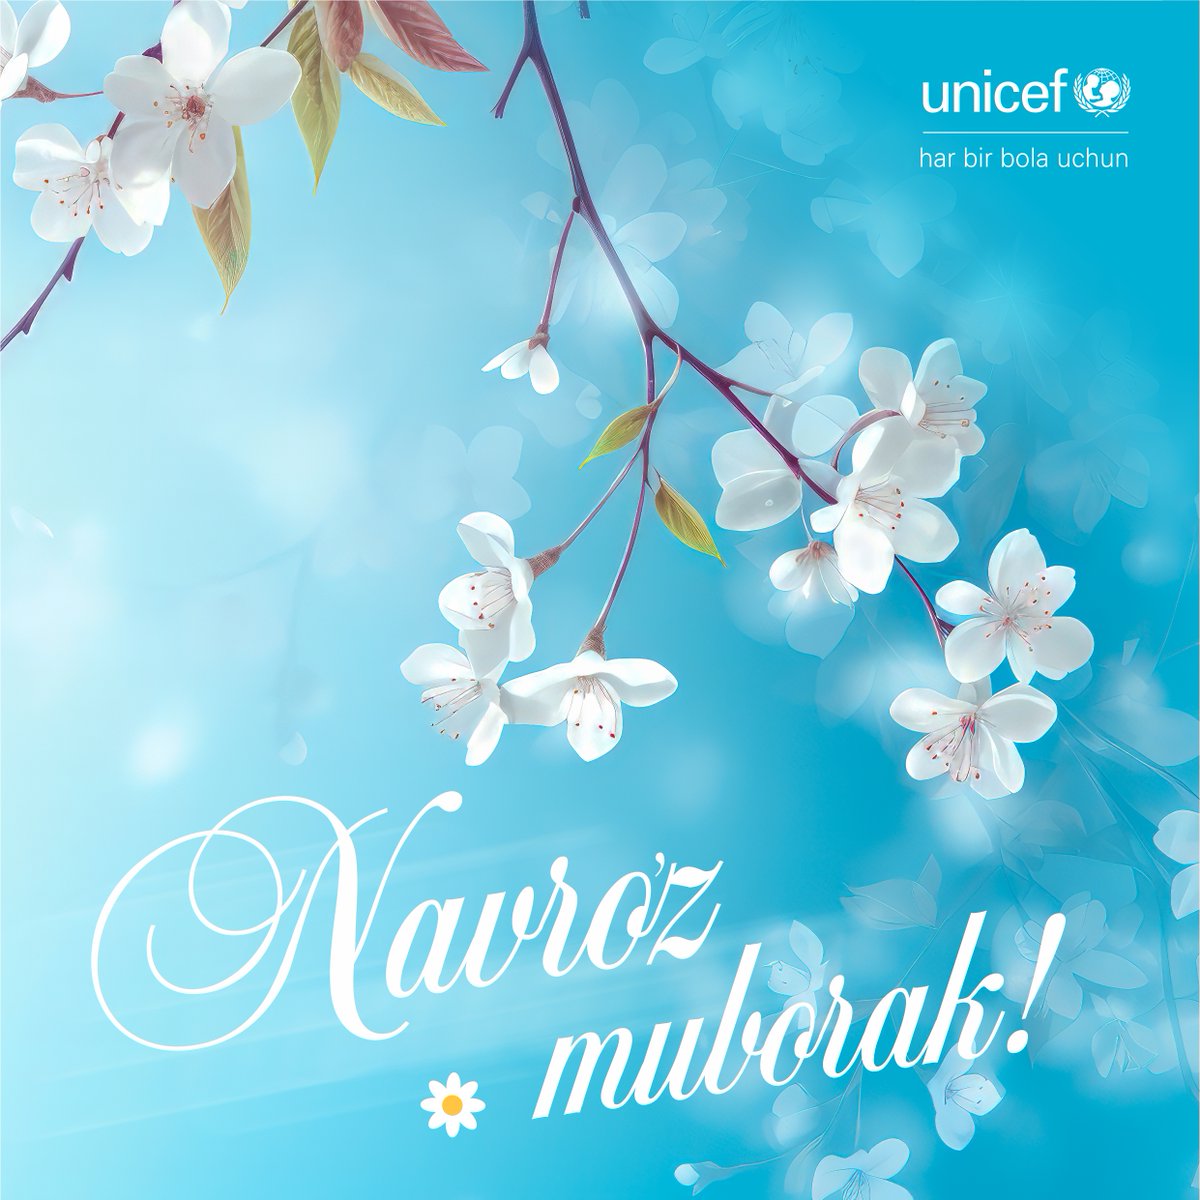 UNICEF Uzbekistan wishes a joyous Navruz celebration. May this special day bring you and your loved ones health, happiness, peace, and prosperity. #ForEveryChild, a bright future! Navruz Muborak! 💙